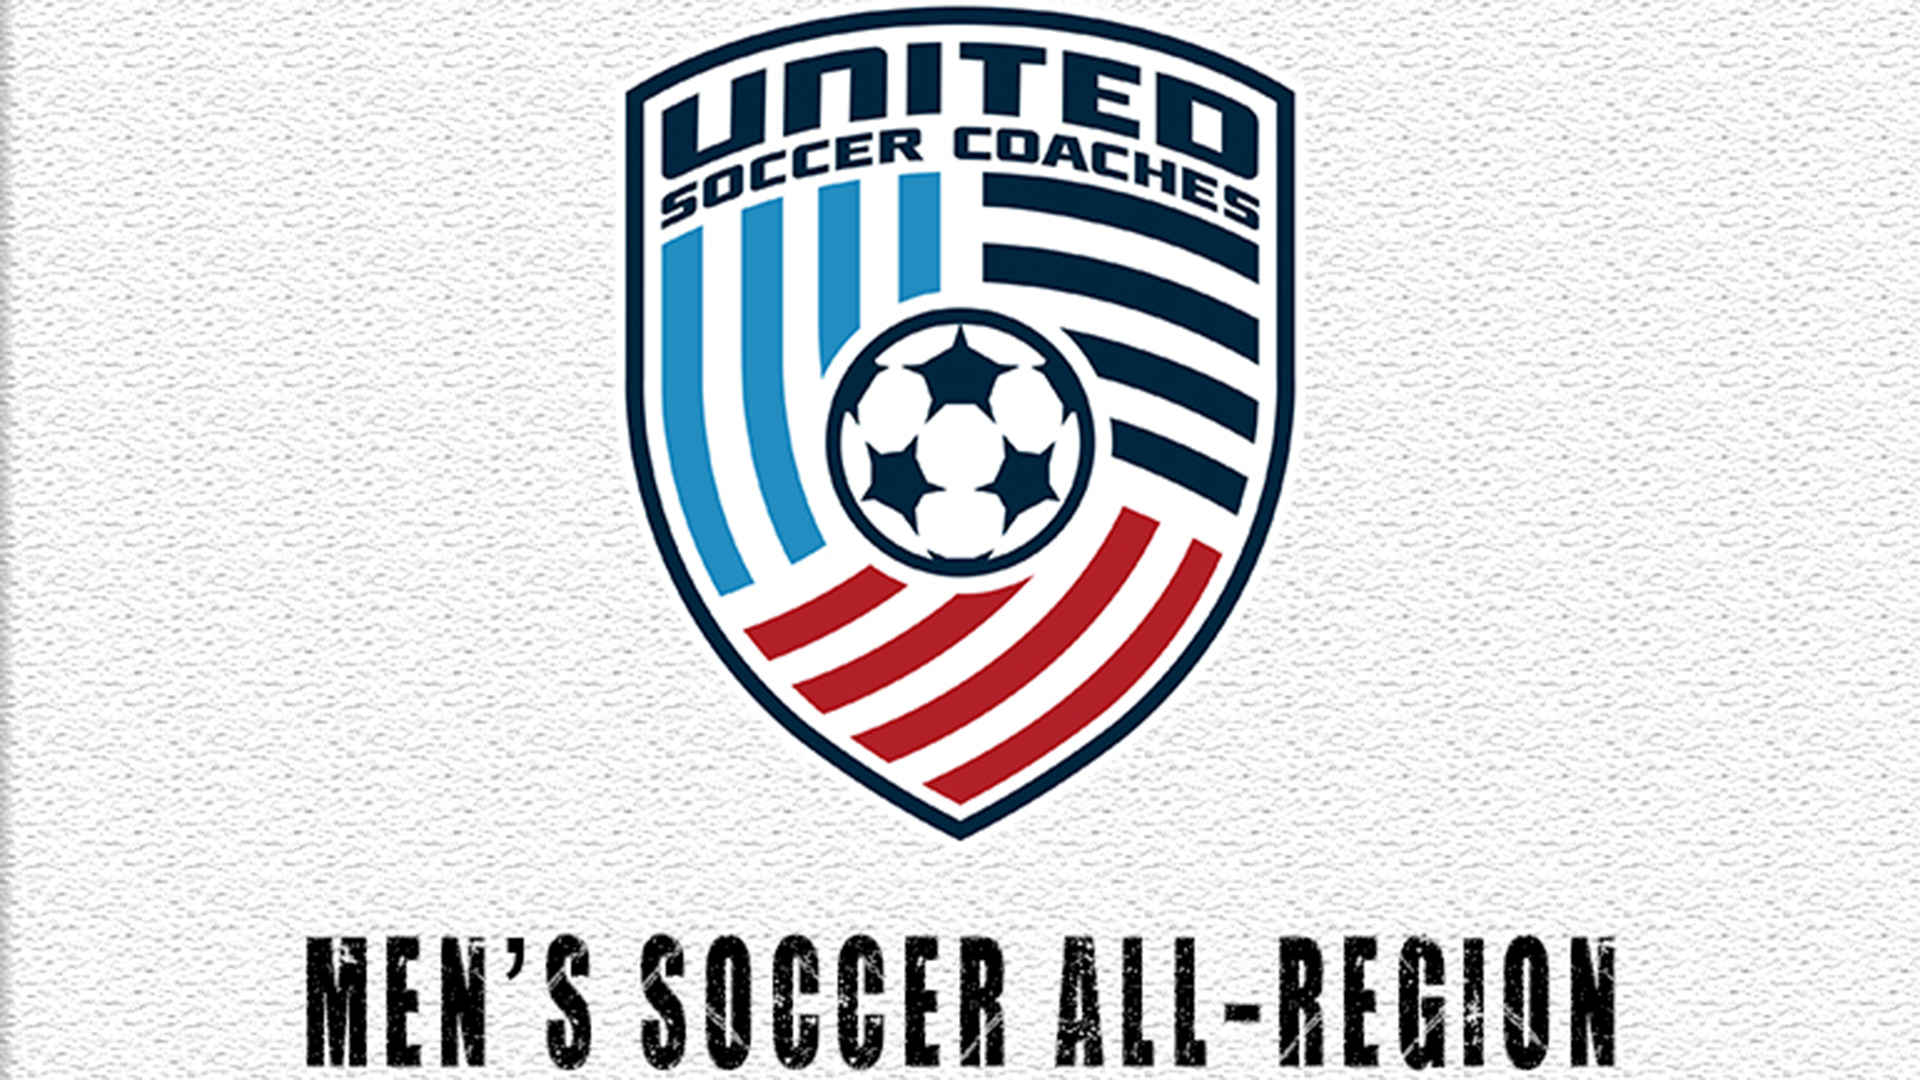 15 Selected United Soccer Coaches All-Region